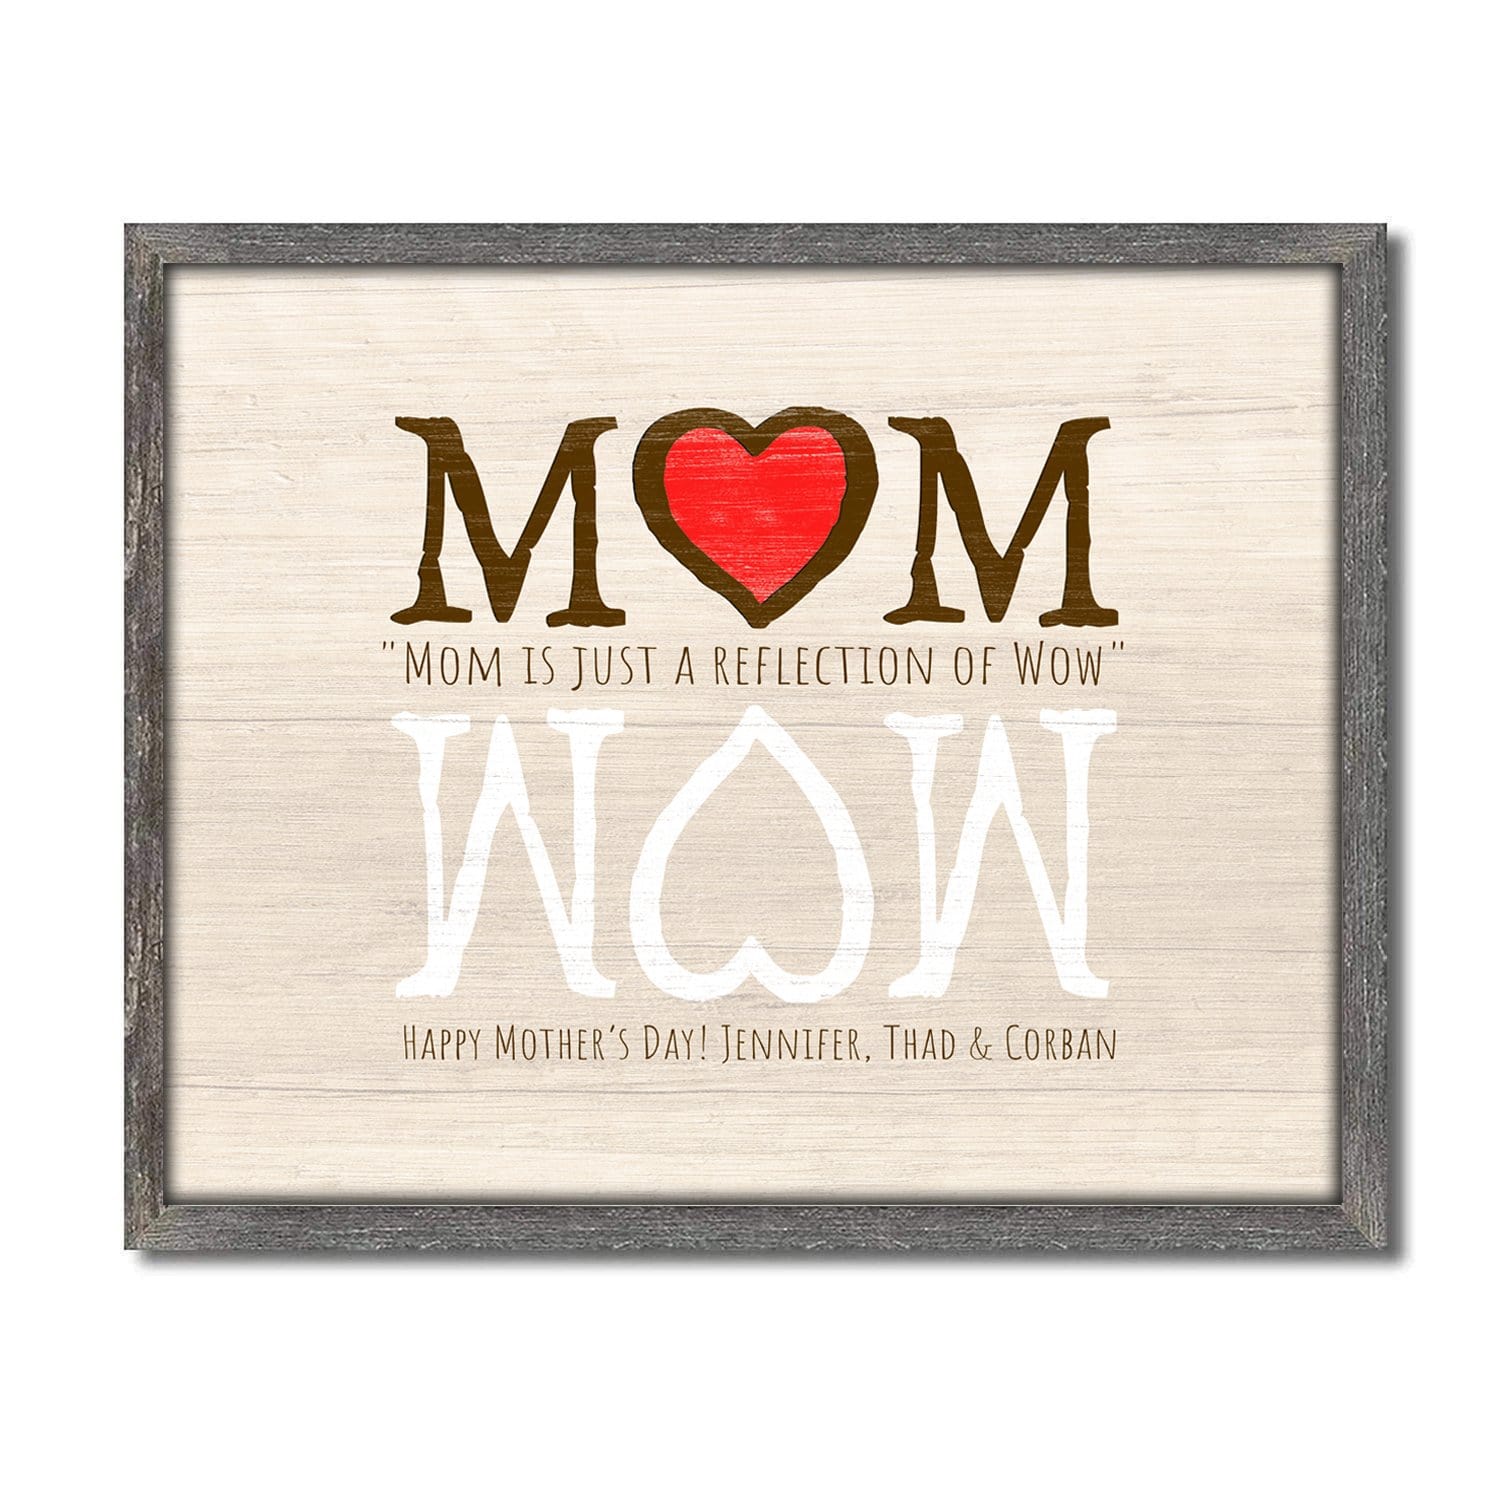 MOM is just a reflection of WOW - Personal Prints